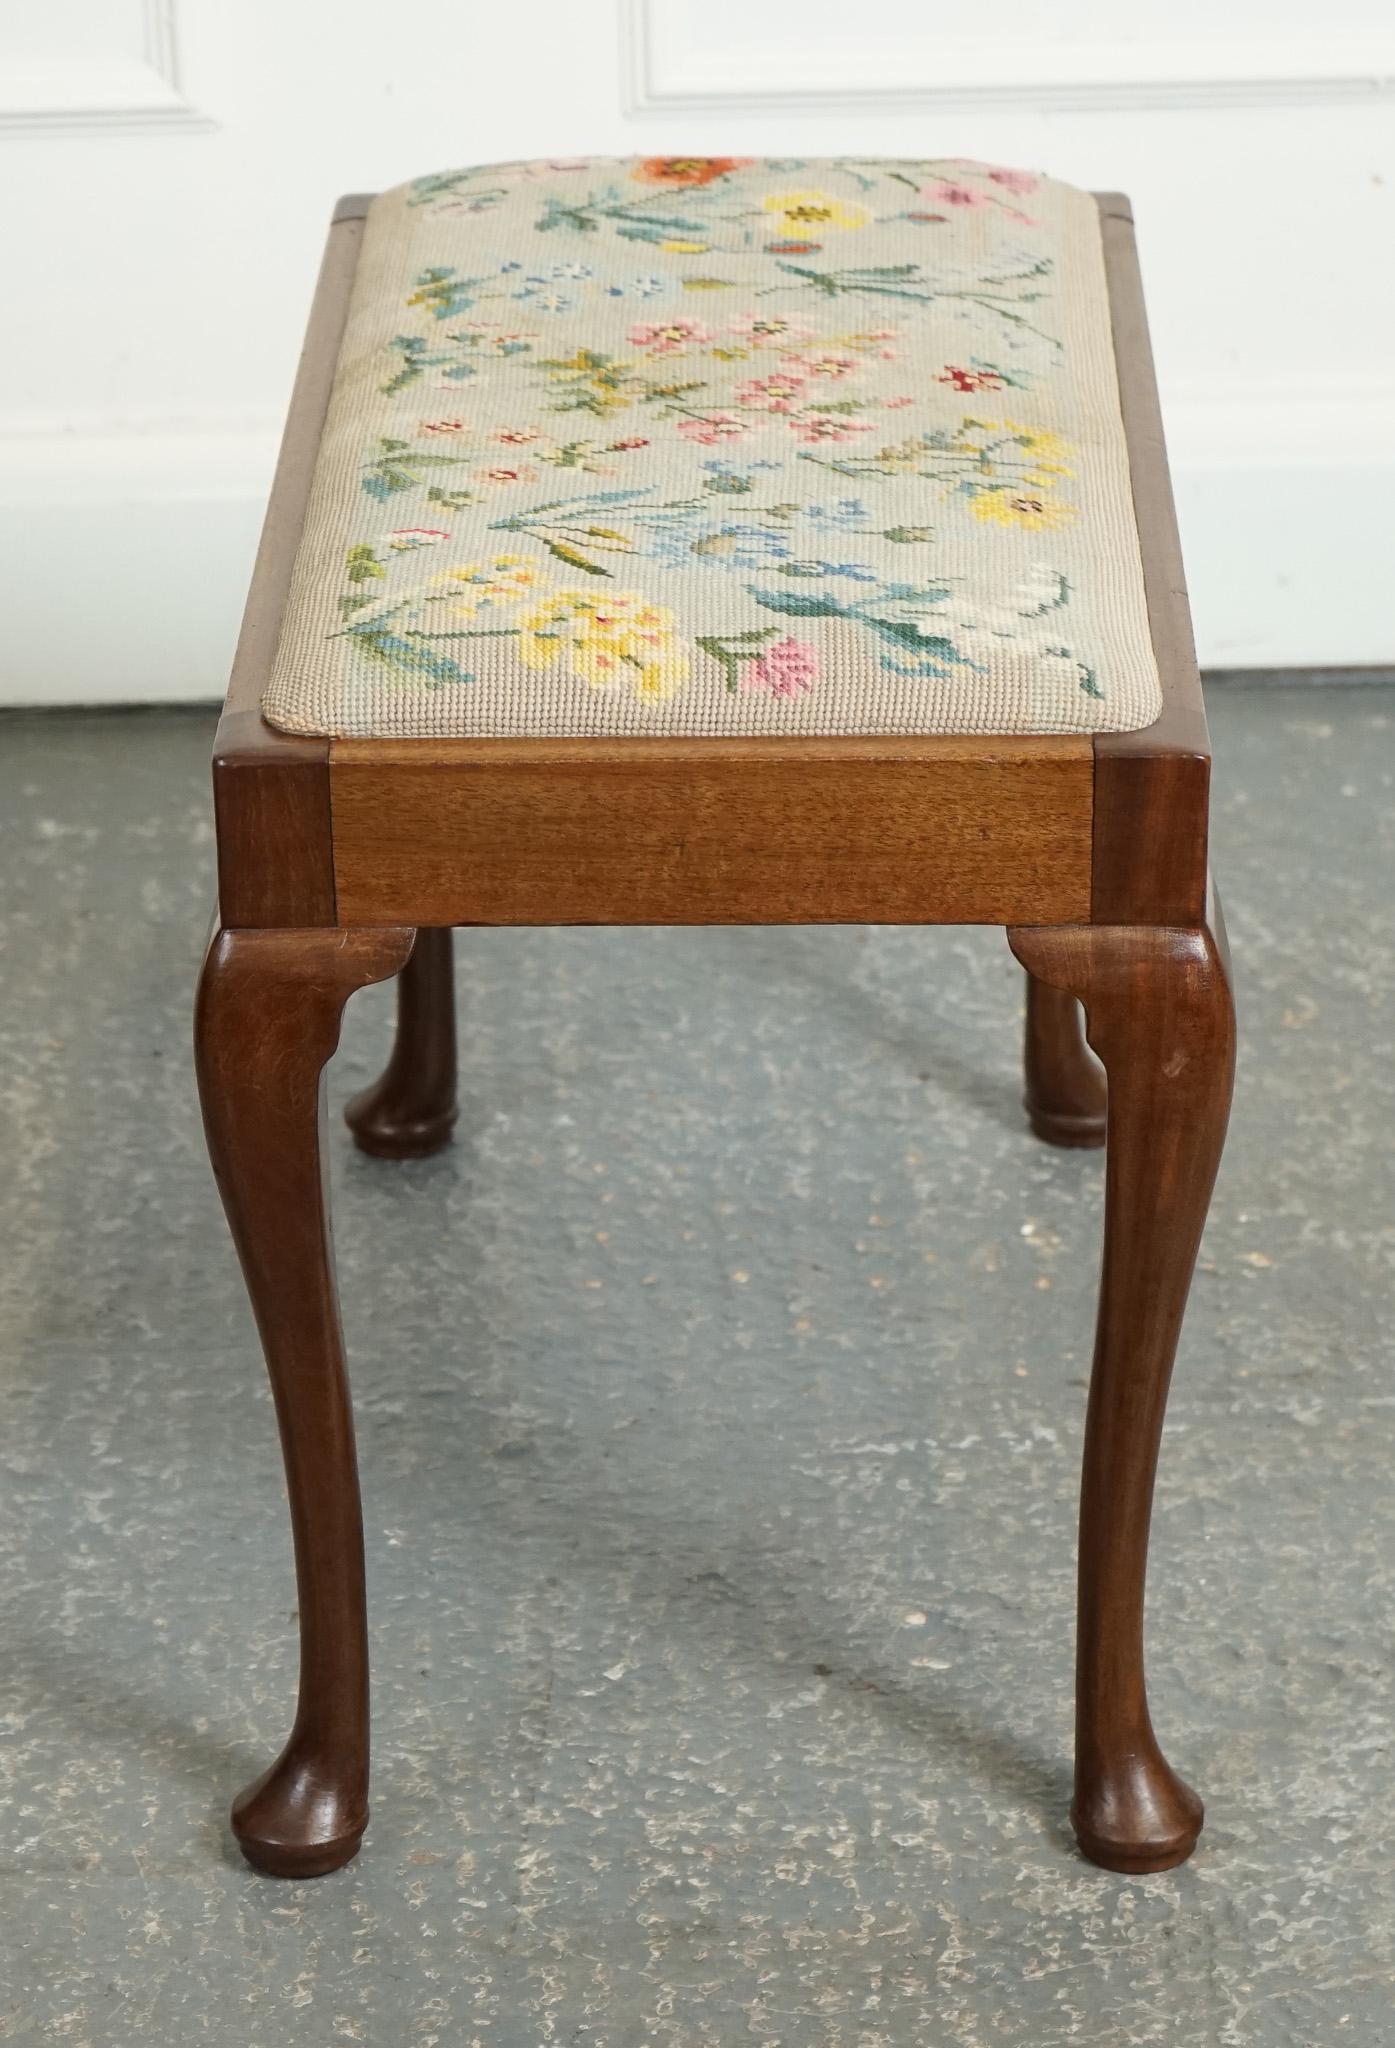 British LARGE PIANO DRESSING TABLE STOOL WITH FLOWER STITCHWORK WITH QUEEN ANNE LEGS j1 For Sale